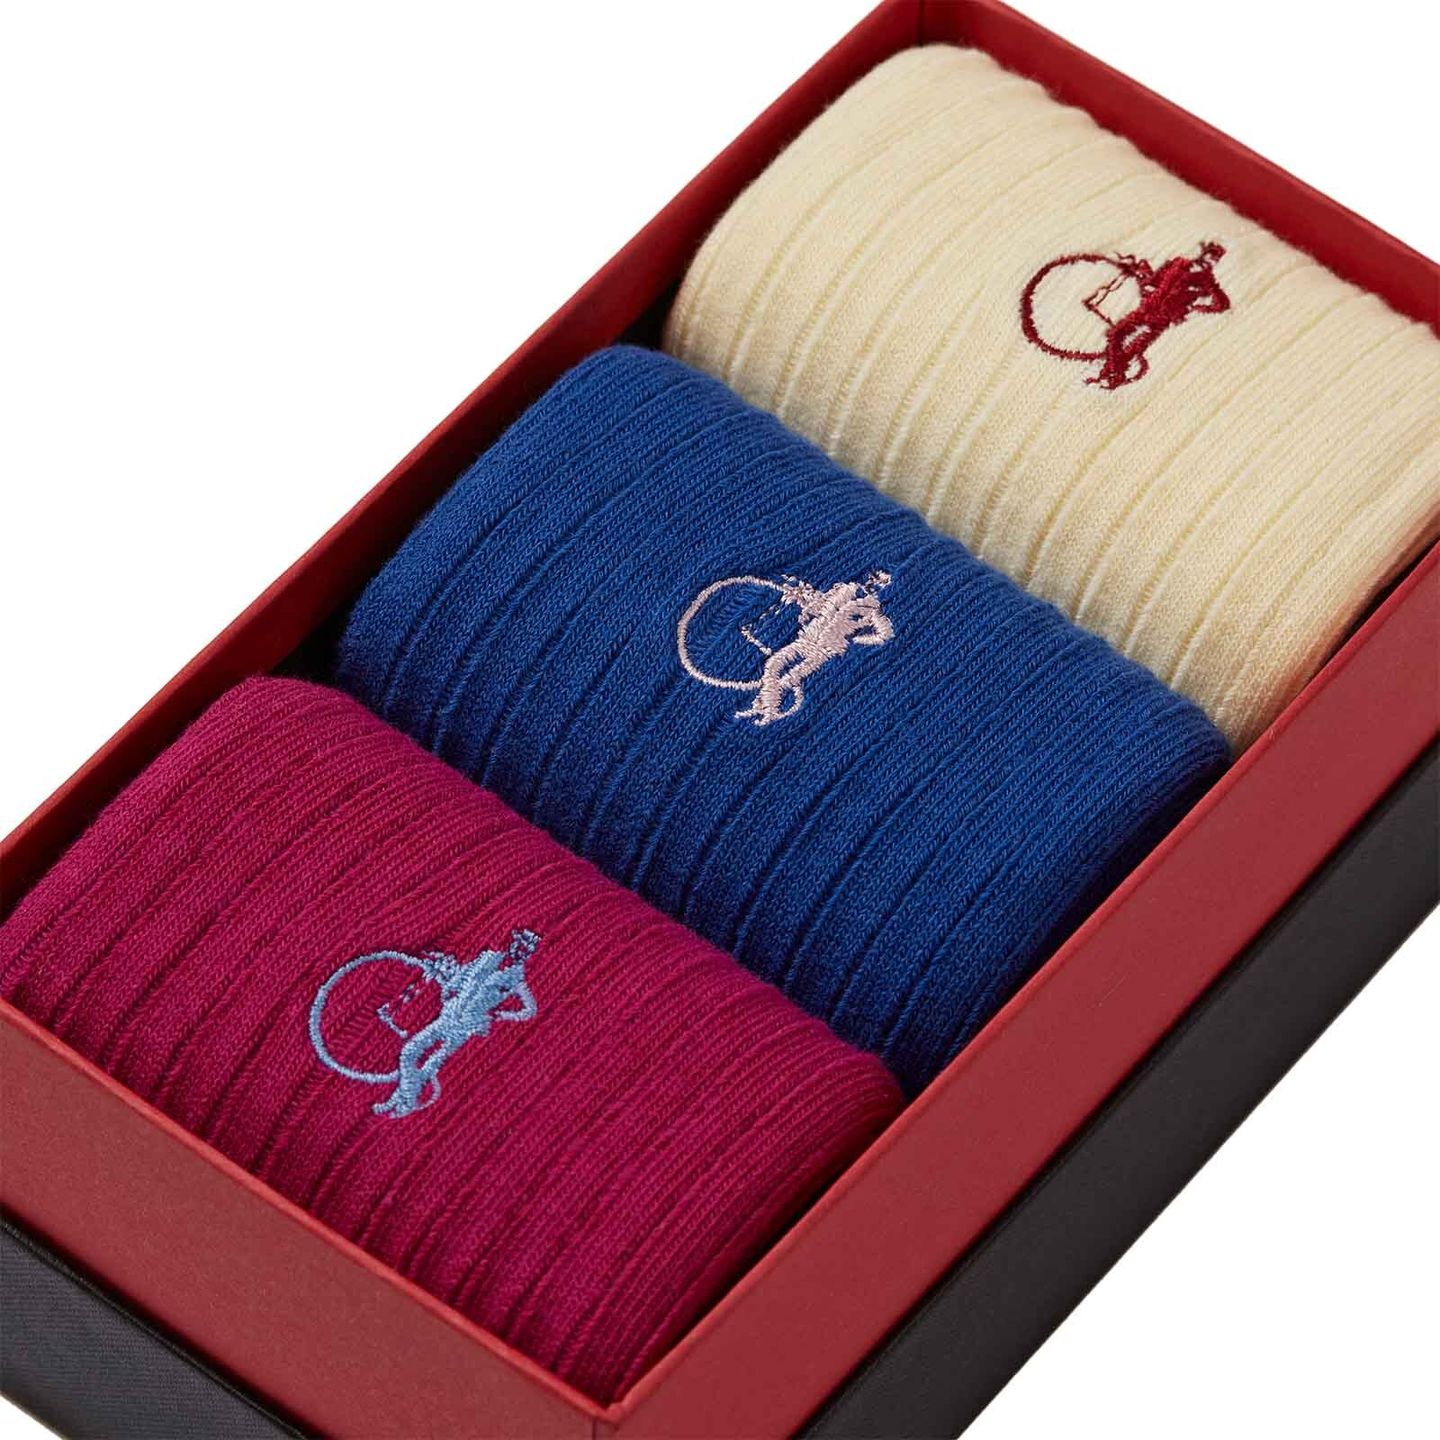 3 pairs of cream, blue and pink socks in a presentation box, part of the Hidden Pop collection